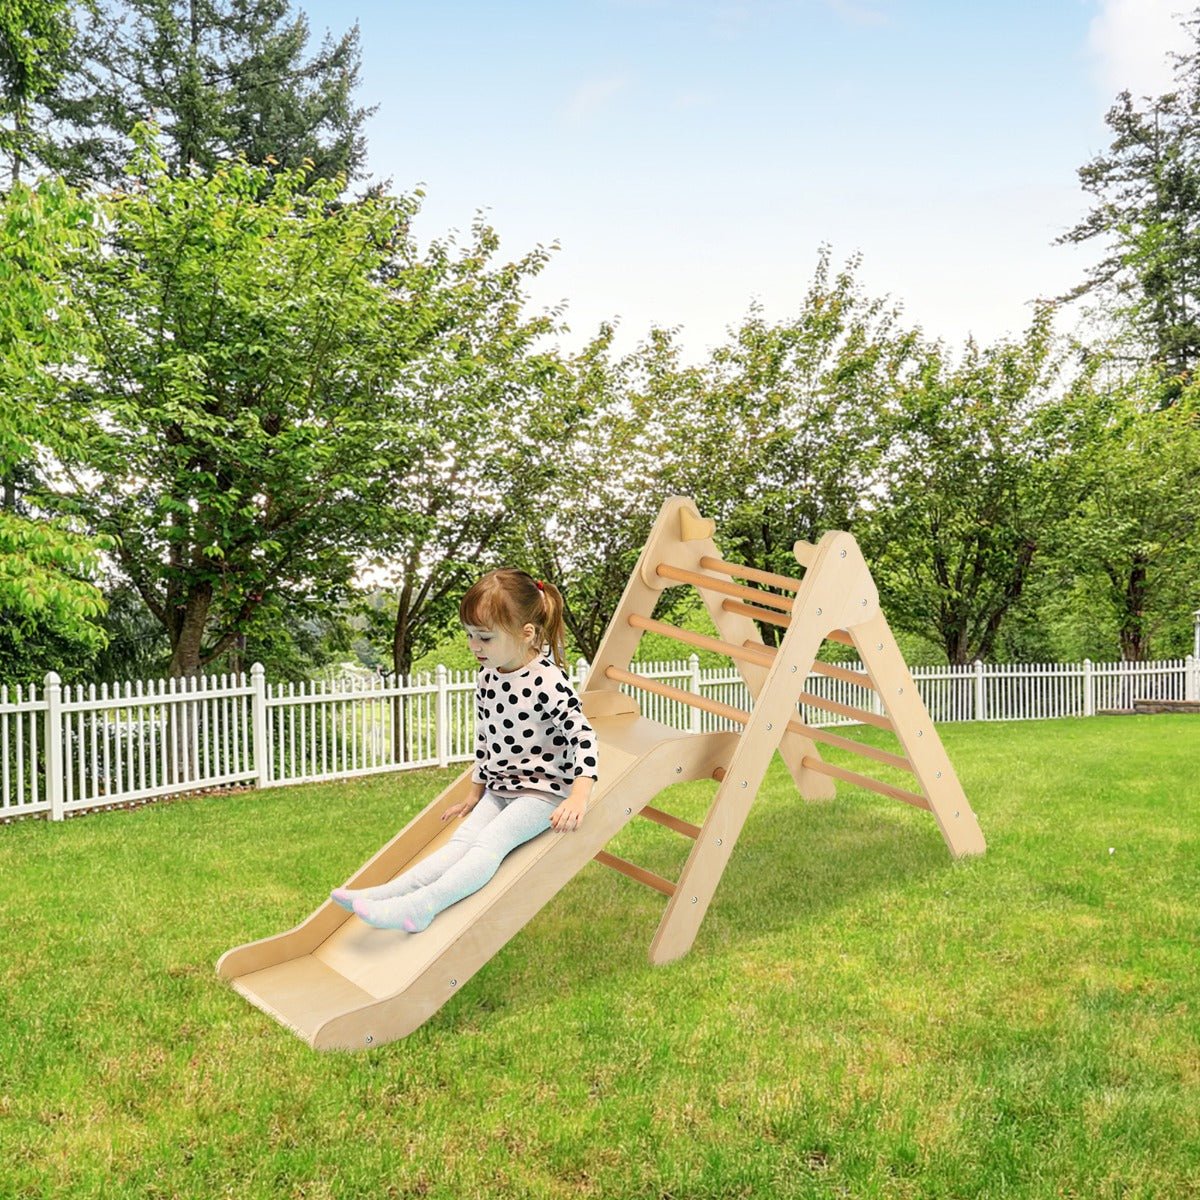 Explore, Climb, and Slide with the Kids Triangle Set